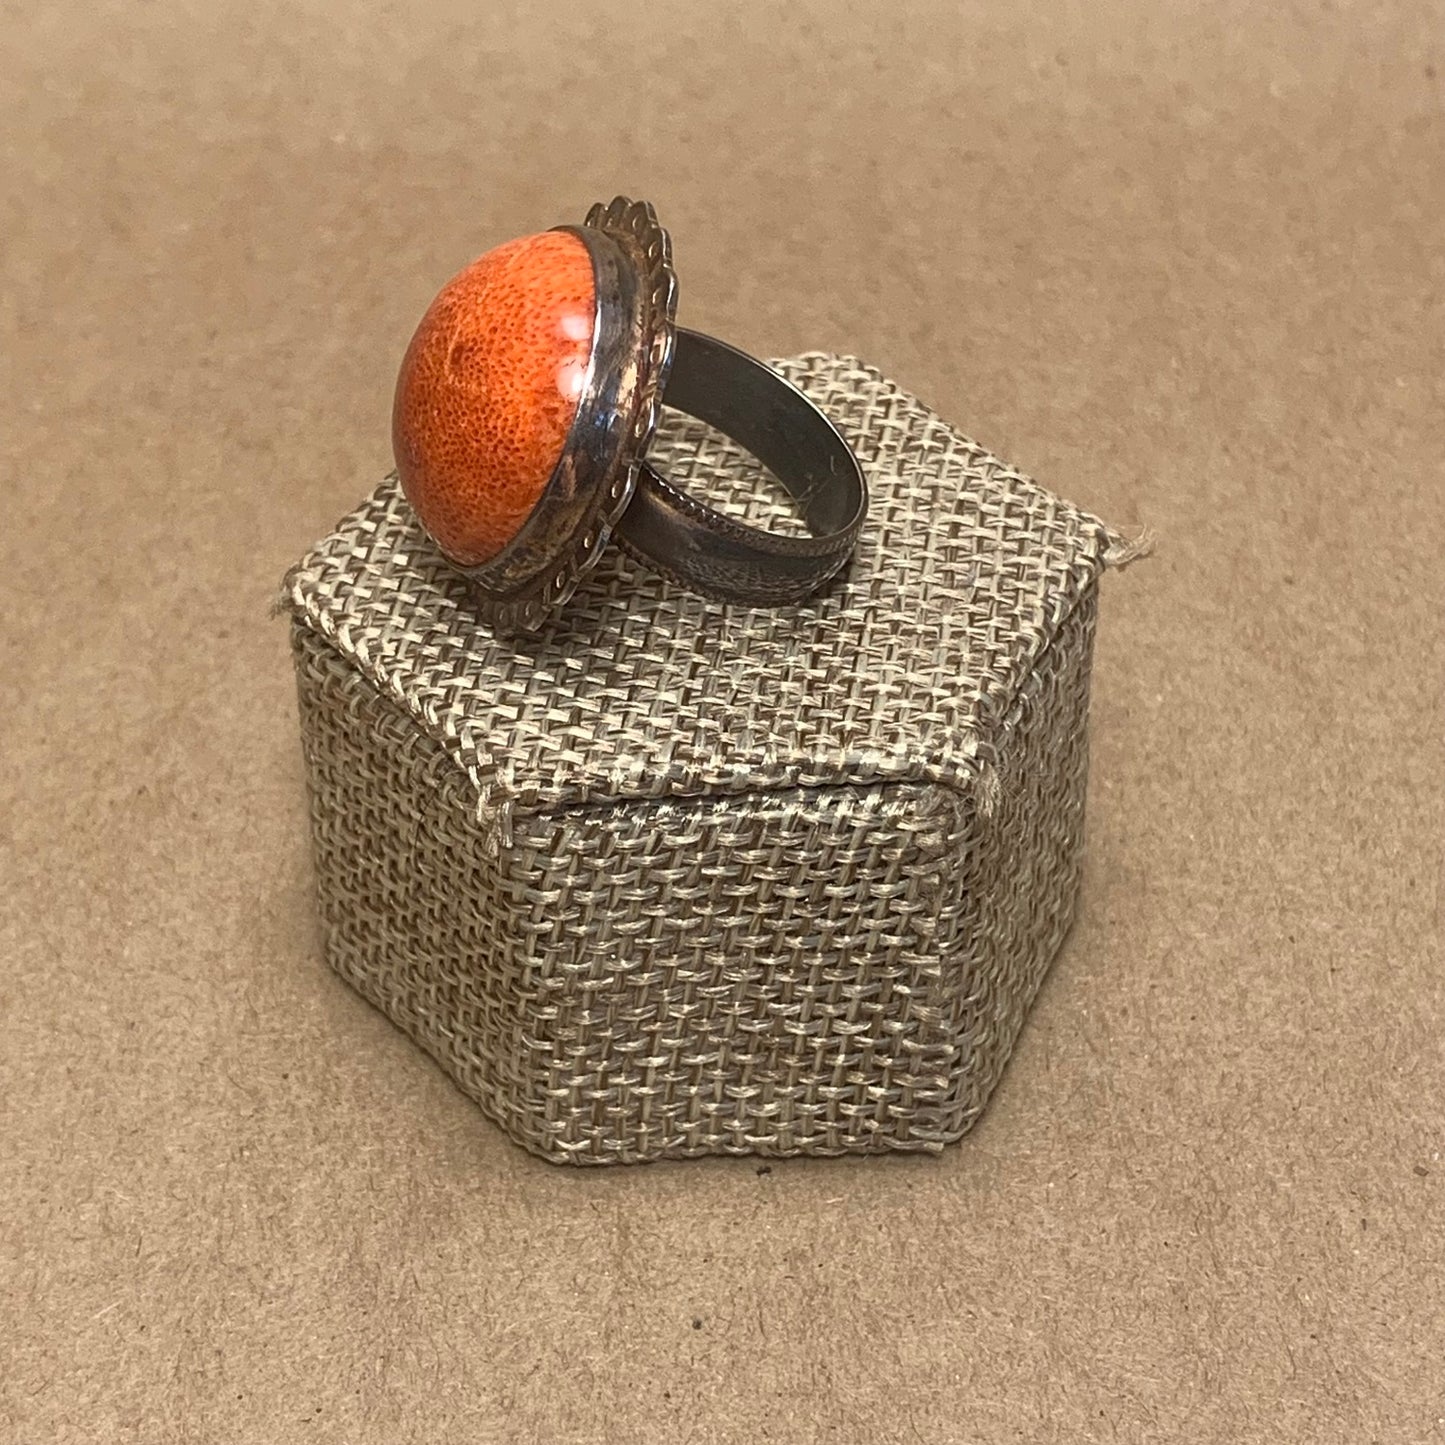 Size 7 Apple Coral and Sterling Silver Ring